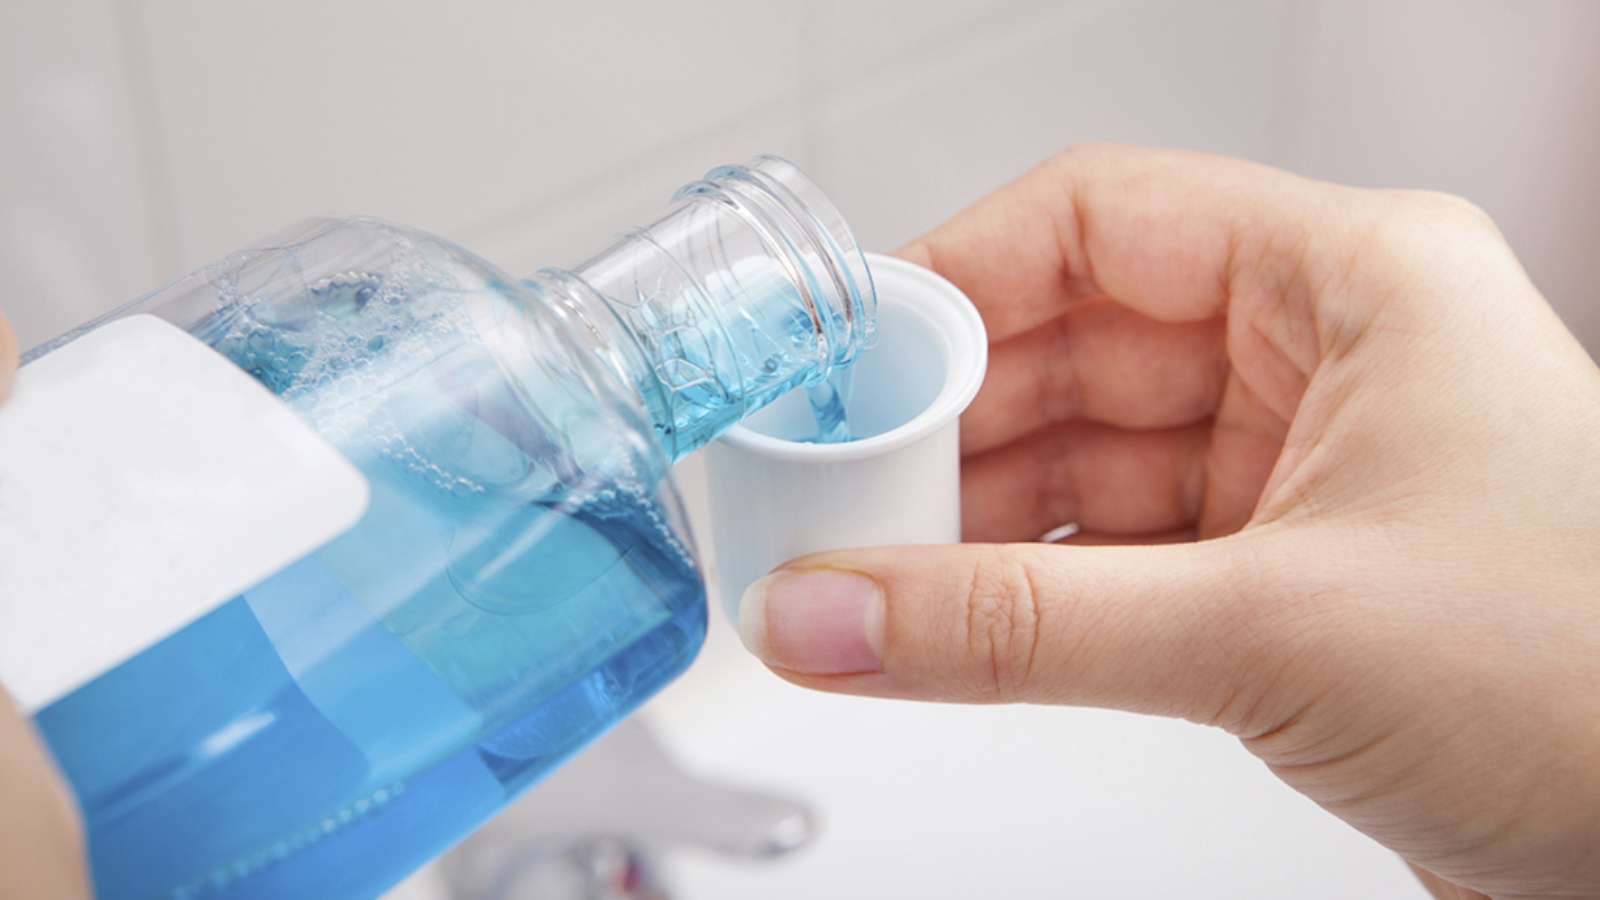 bad breath mouthwashes reviews - pouring mouthwash into the cap to get rid of bad breath